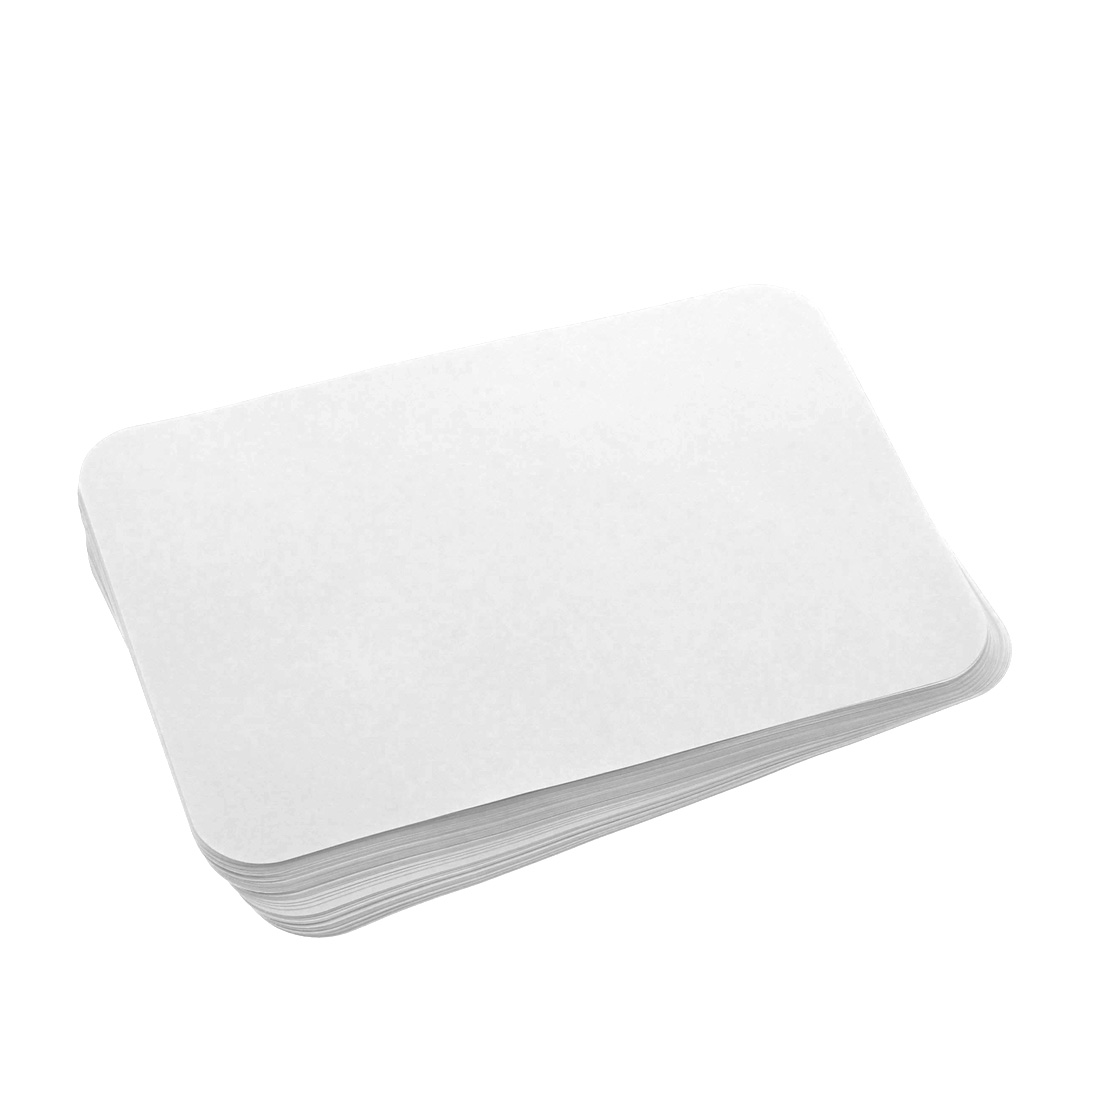 Bracket Tray Covers, Size A - Weber/Chayes, 9.5" x 12.25", White - 1000/Box